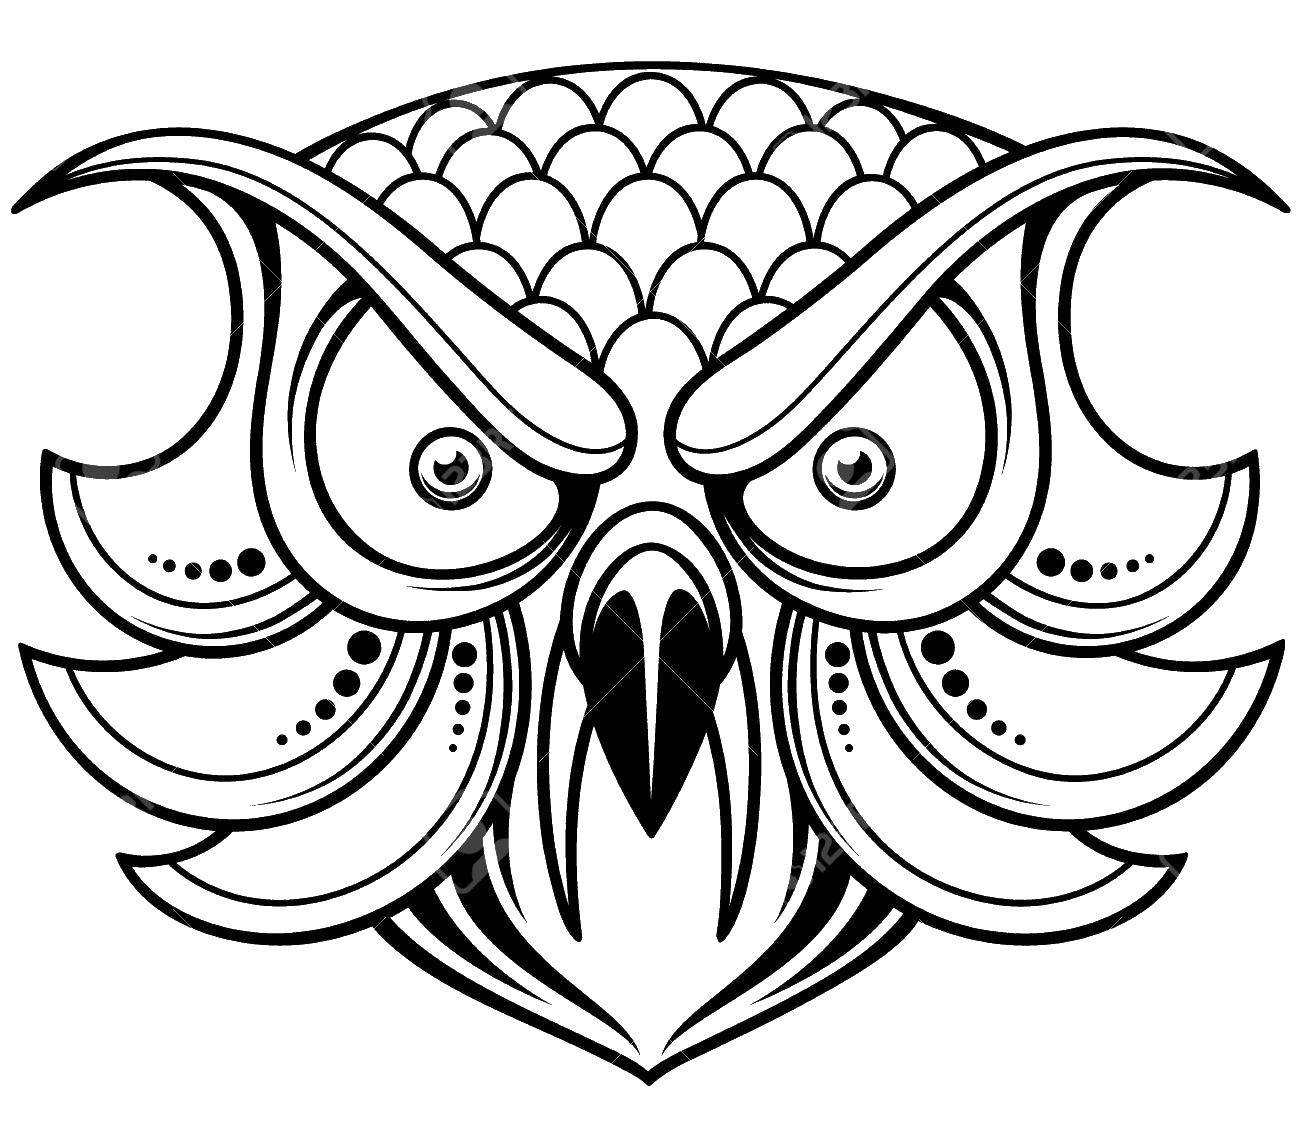 Coloring Angry owl. Category birds. Tags:  Birds, owl.